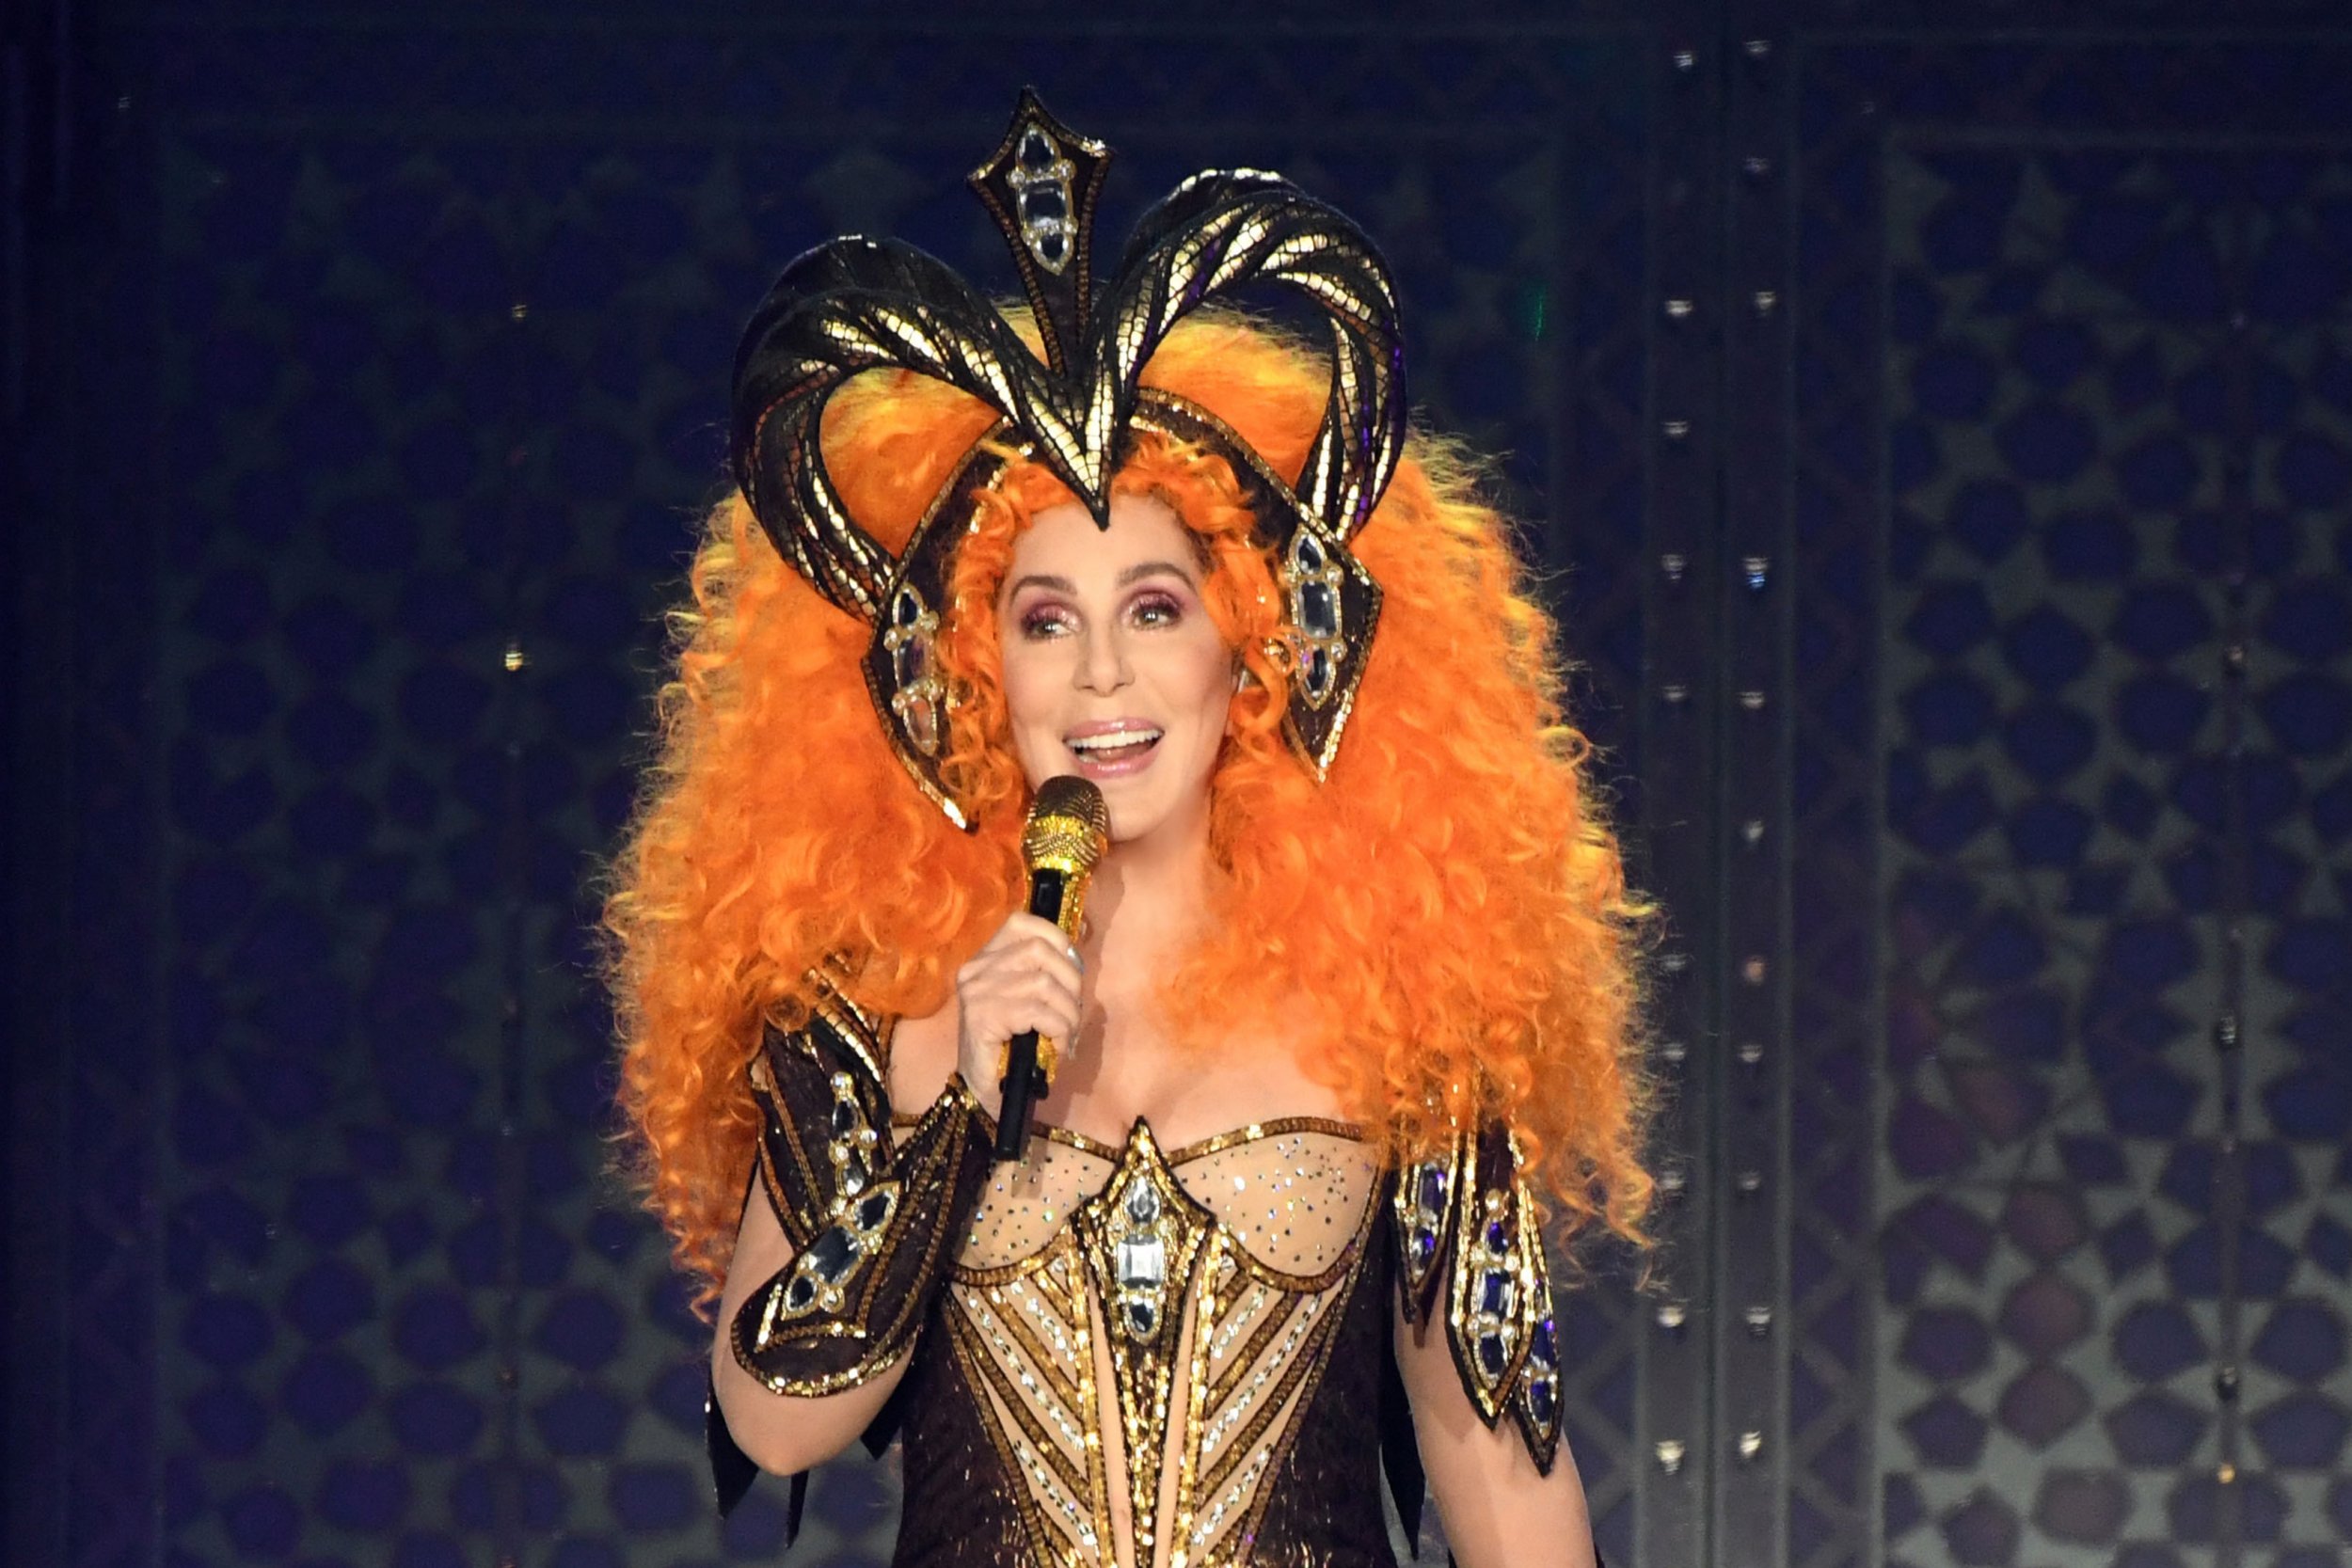 Cher Turns Back Time At Opening Night Of The "Here We Go Again" Tour - Her First US Tour In Five Years